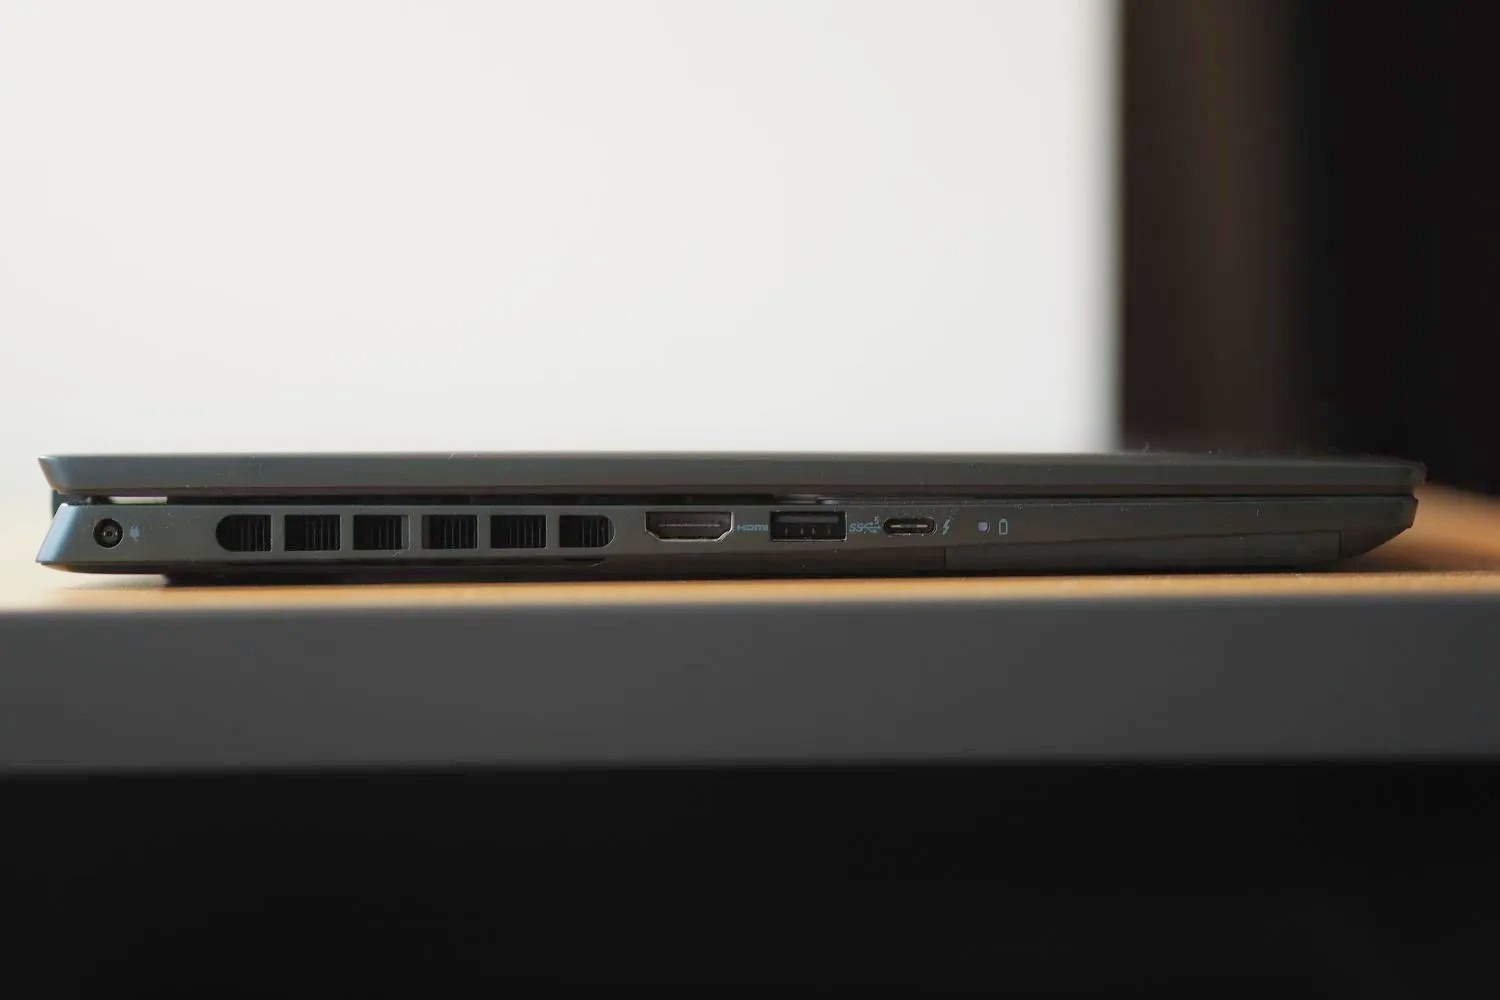 Dell Inspiron 14 Plus review: plus in more ways than one